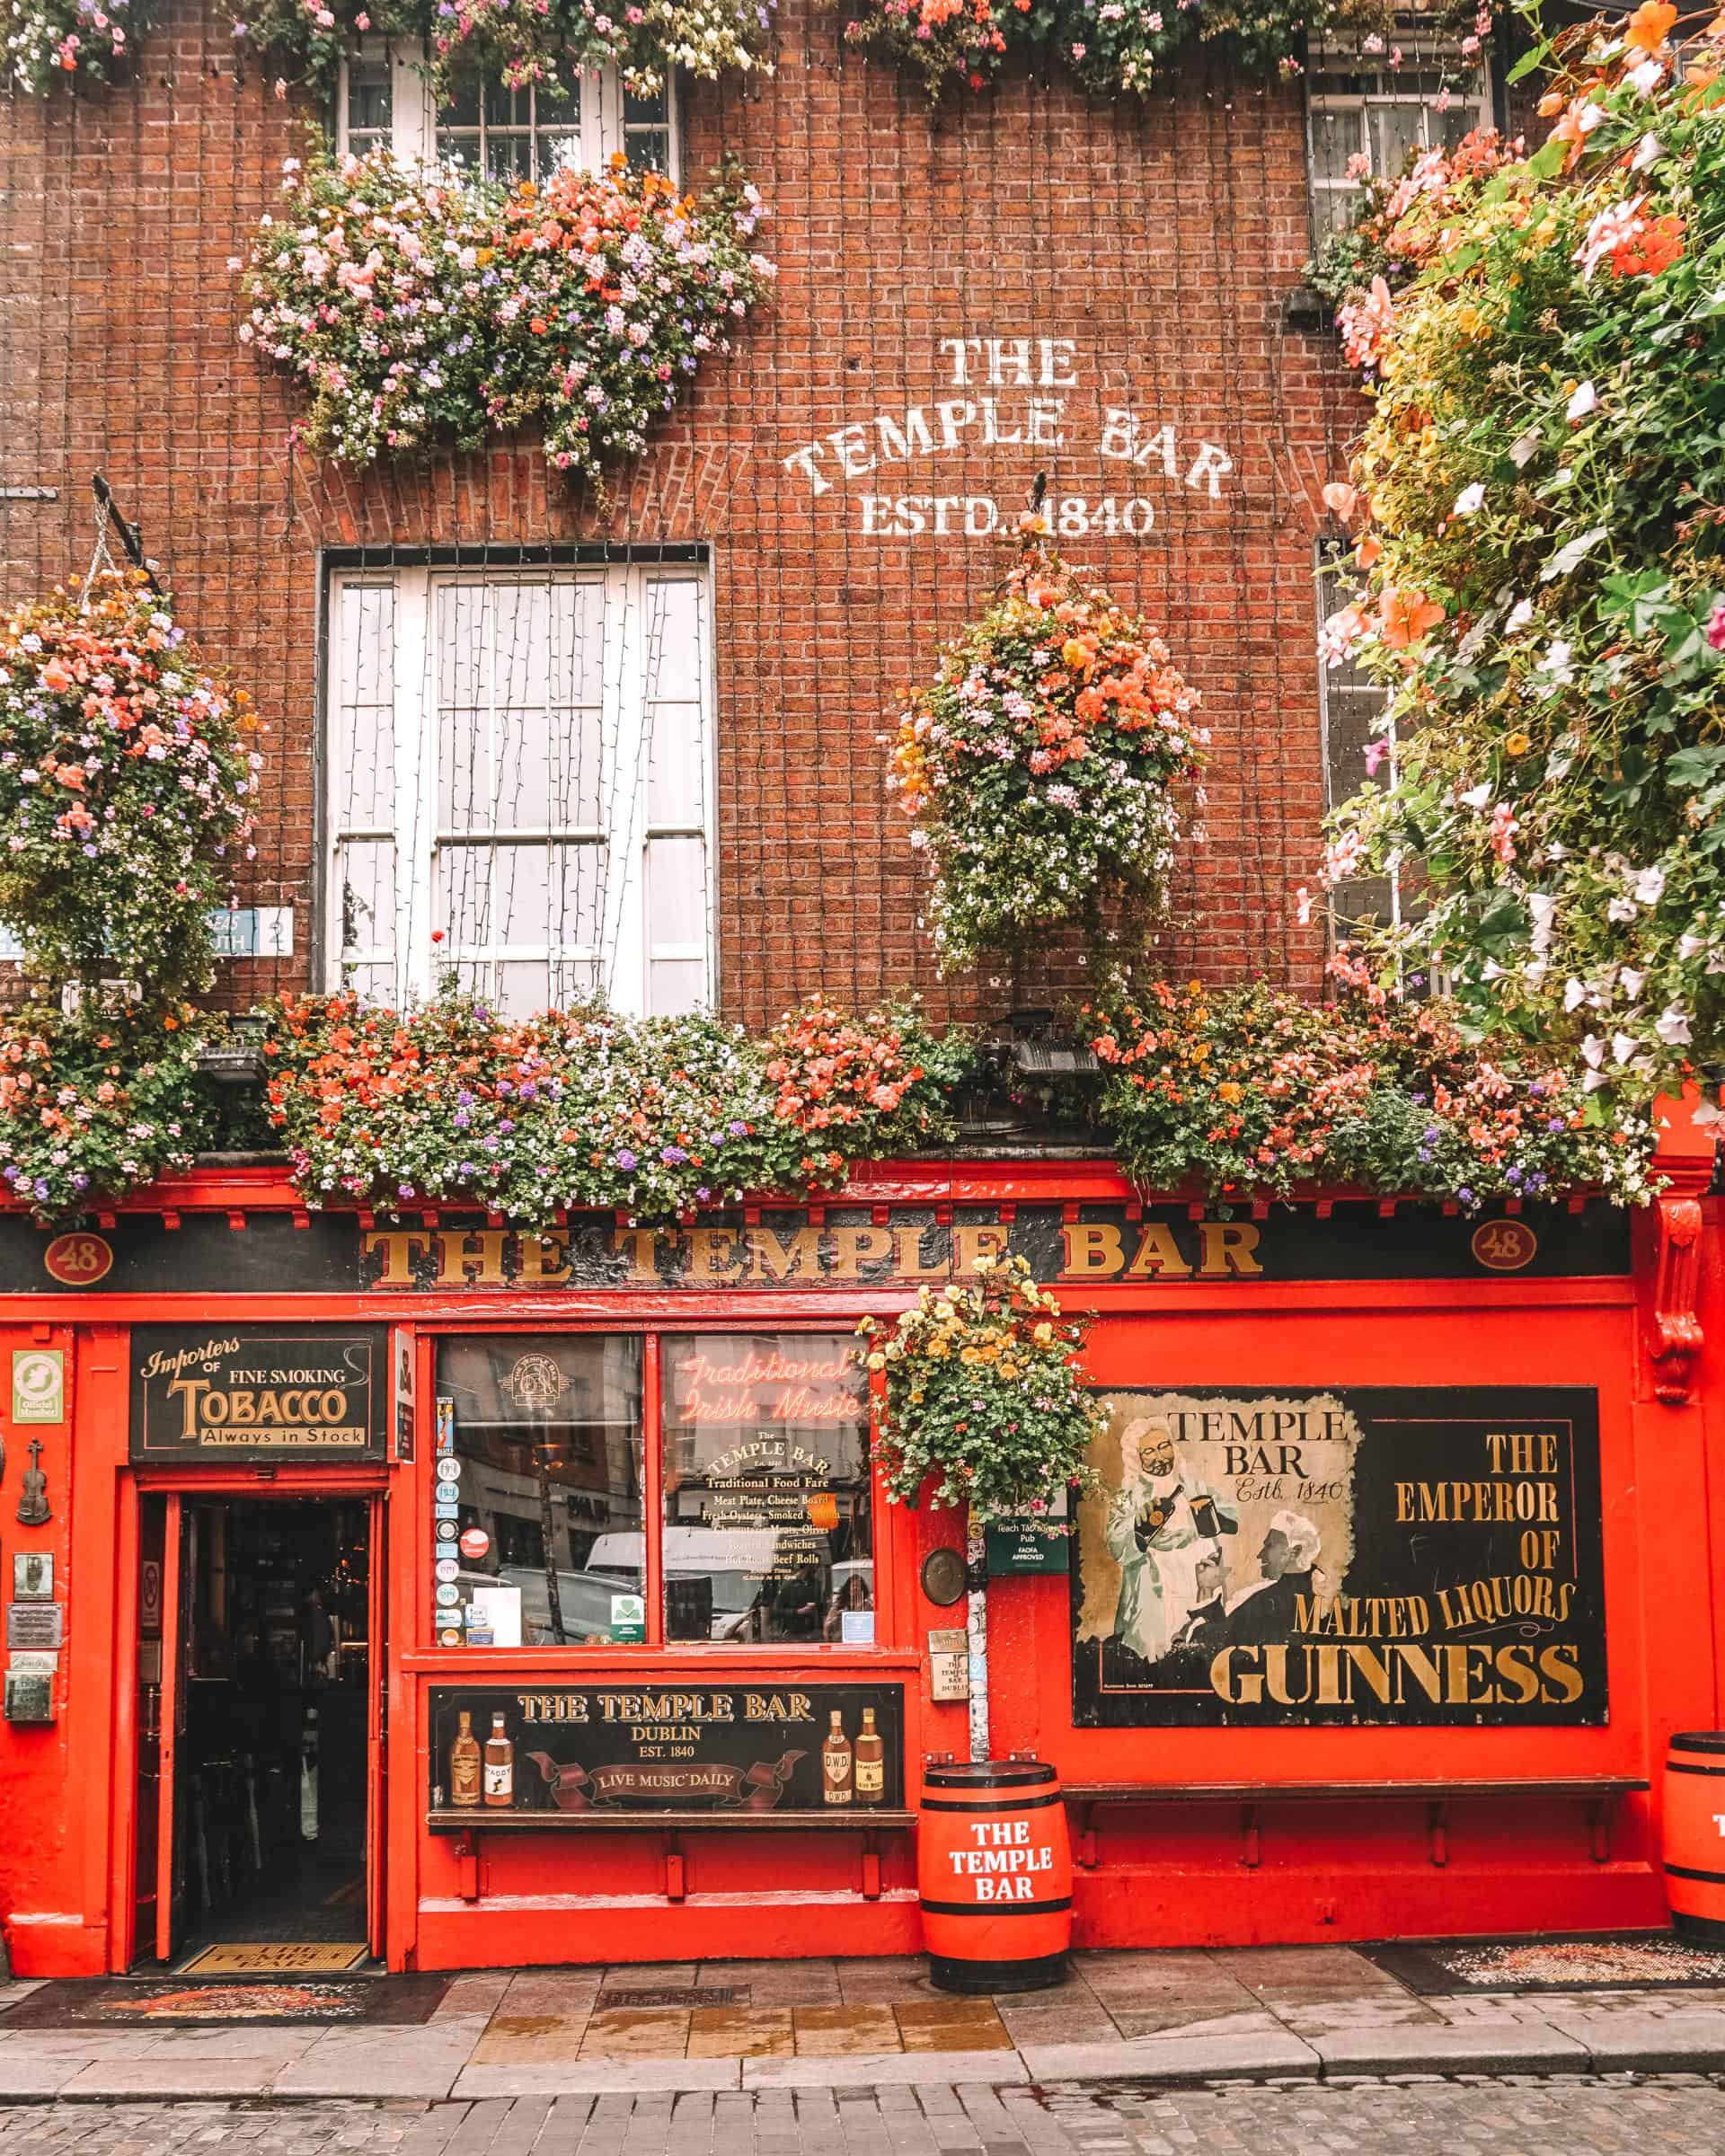 what is the best time of day to go to the temple bar